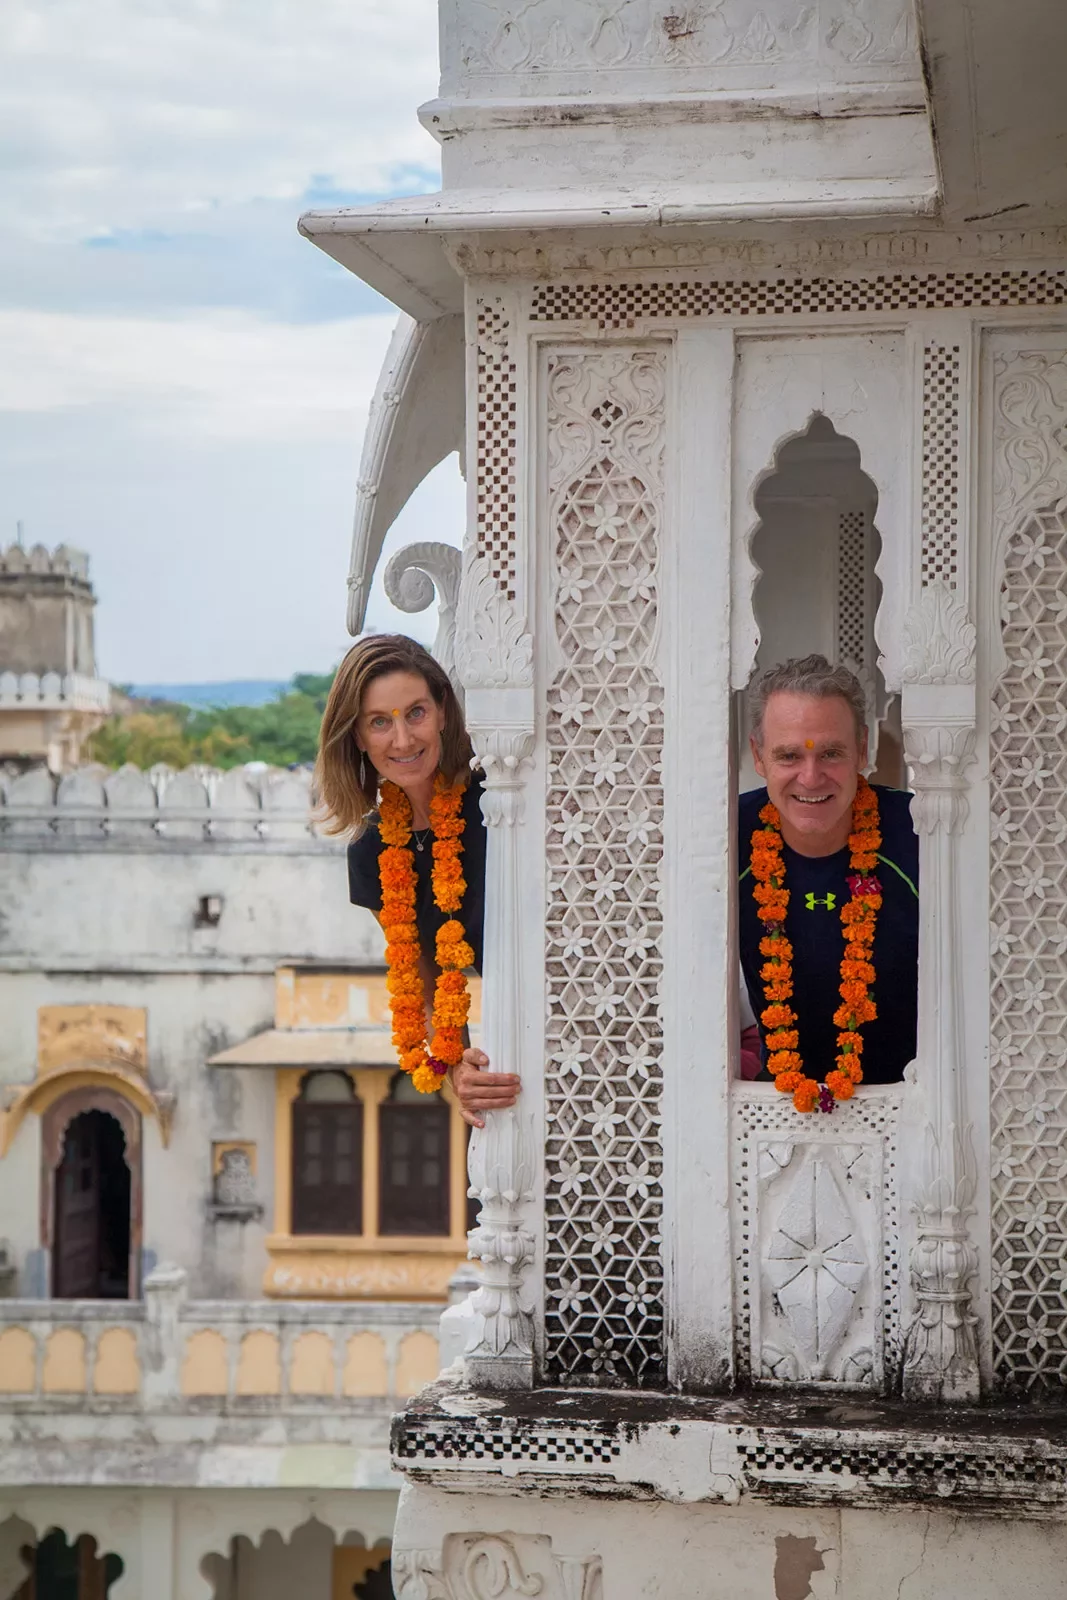 Backroads guests peeking through windows of an ornate white building in India